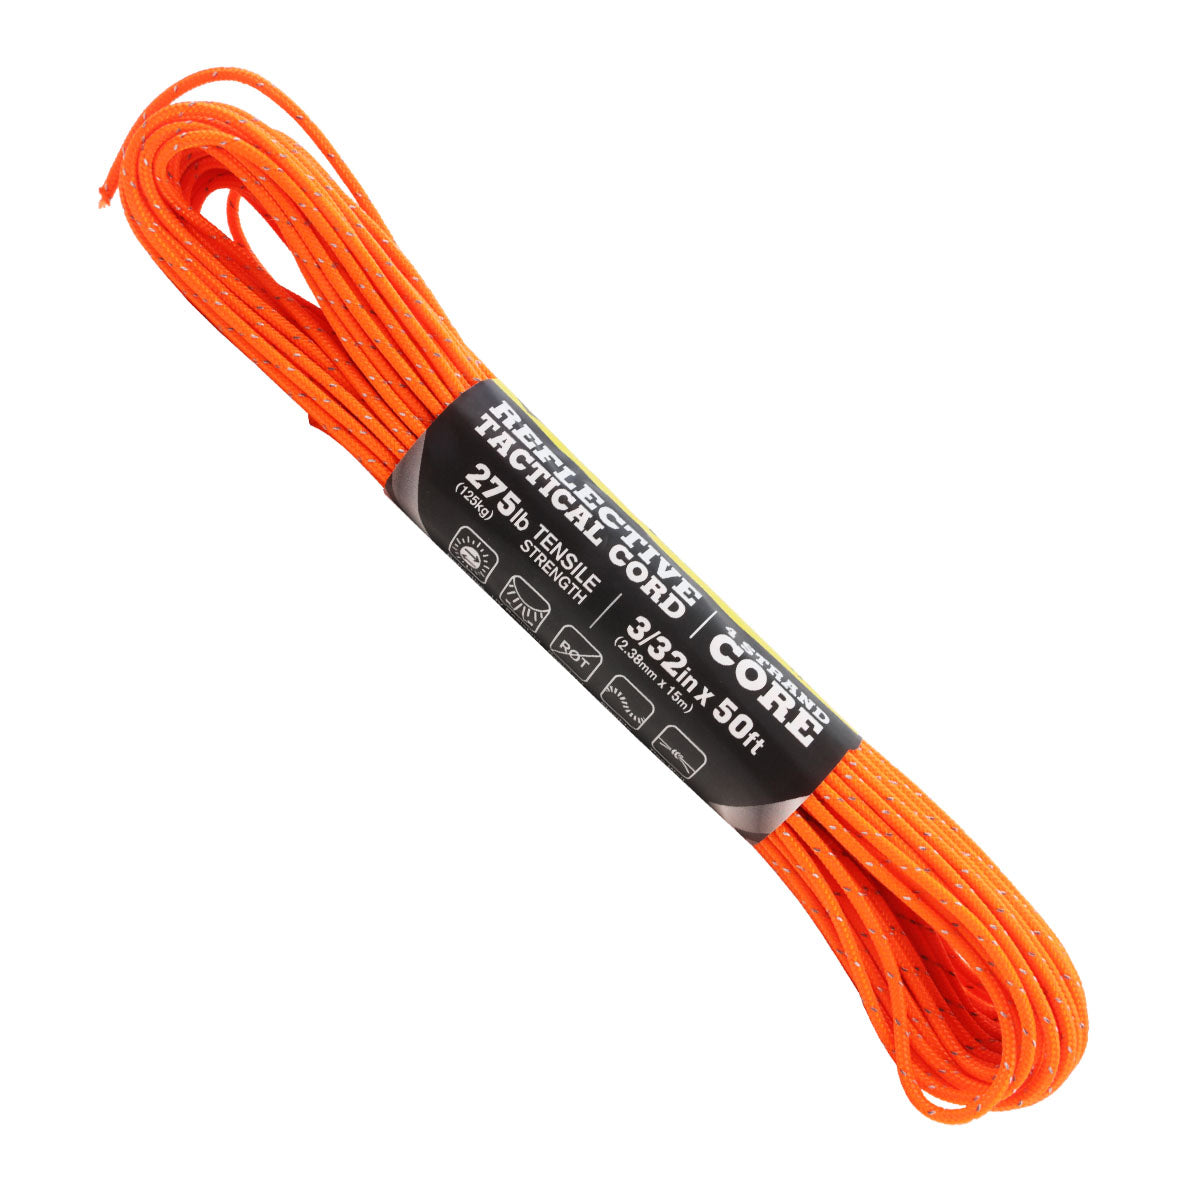 Tactical Paracord-Schnur in orange 2,4 mm 30,5 m 4-Kern Atwood Rope MFG 